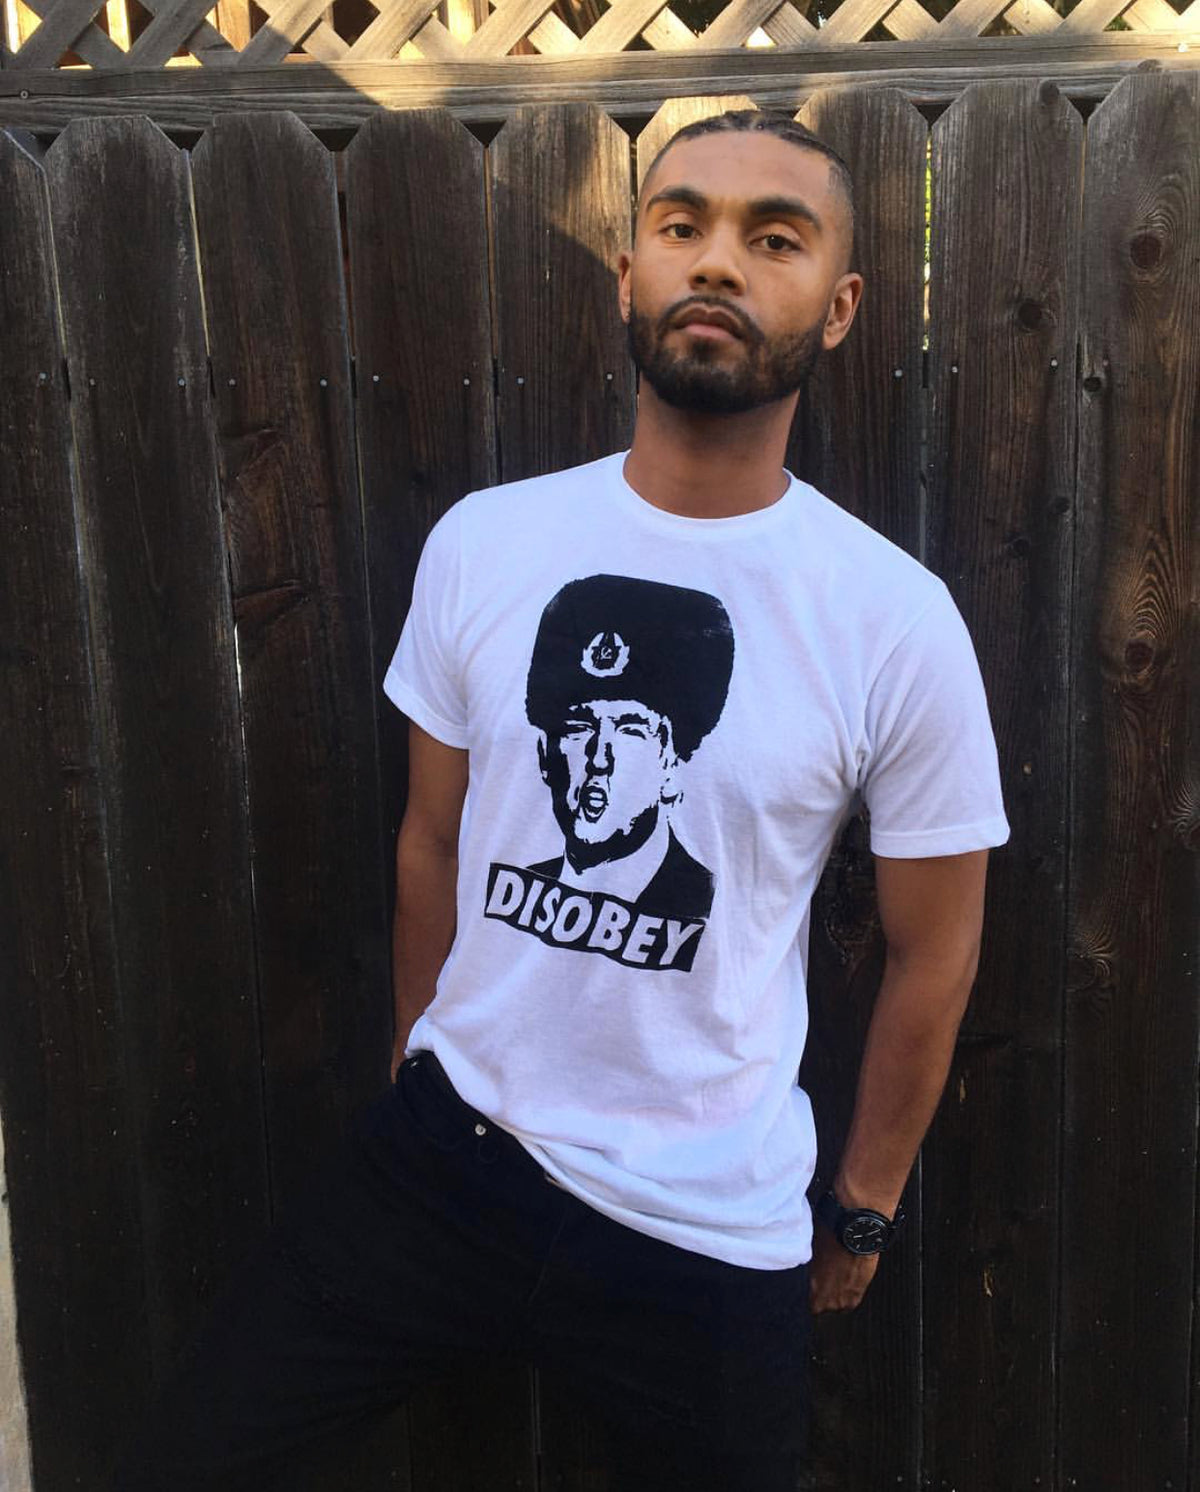 Disobey T-shirt feat. Donald Trump with Mickey ears or Russian ushanka